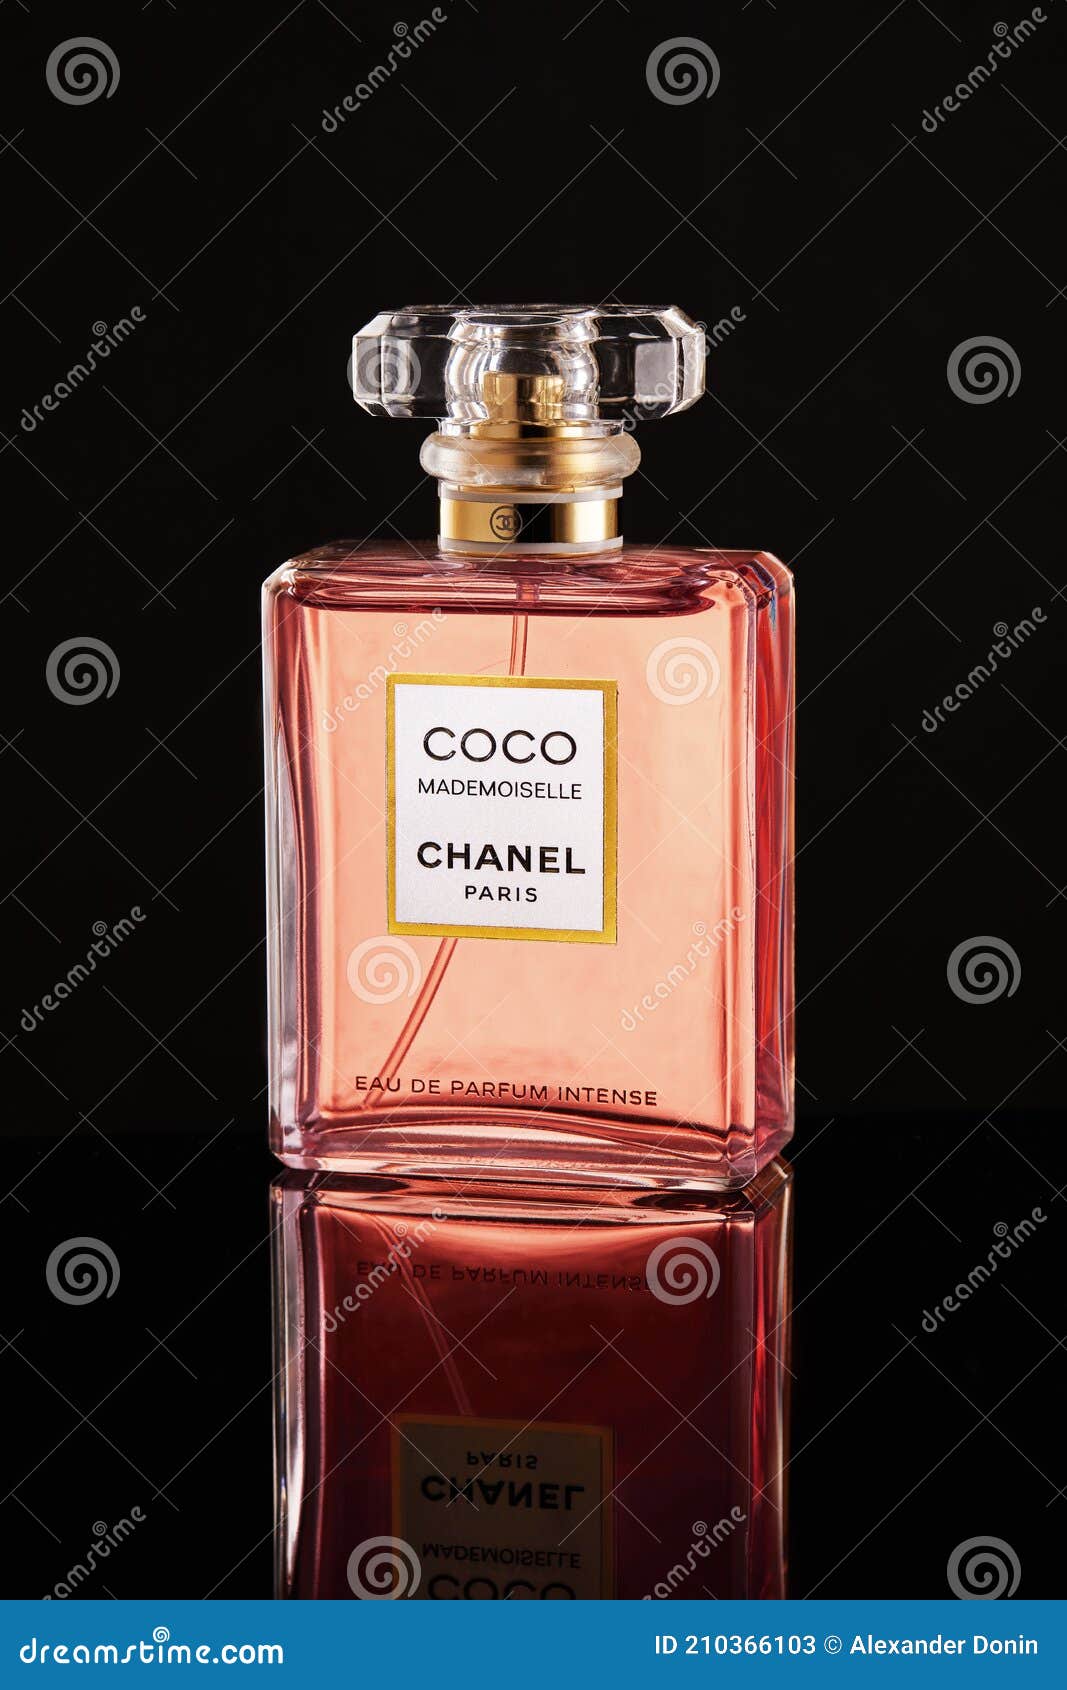 French Perfume Chanel Coco Mademoiselle Editorial Stock Photo - Image of  light, background: 210366103